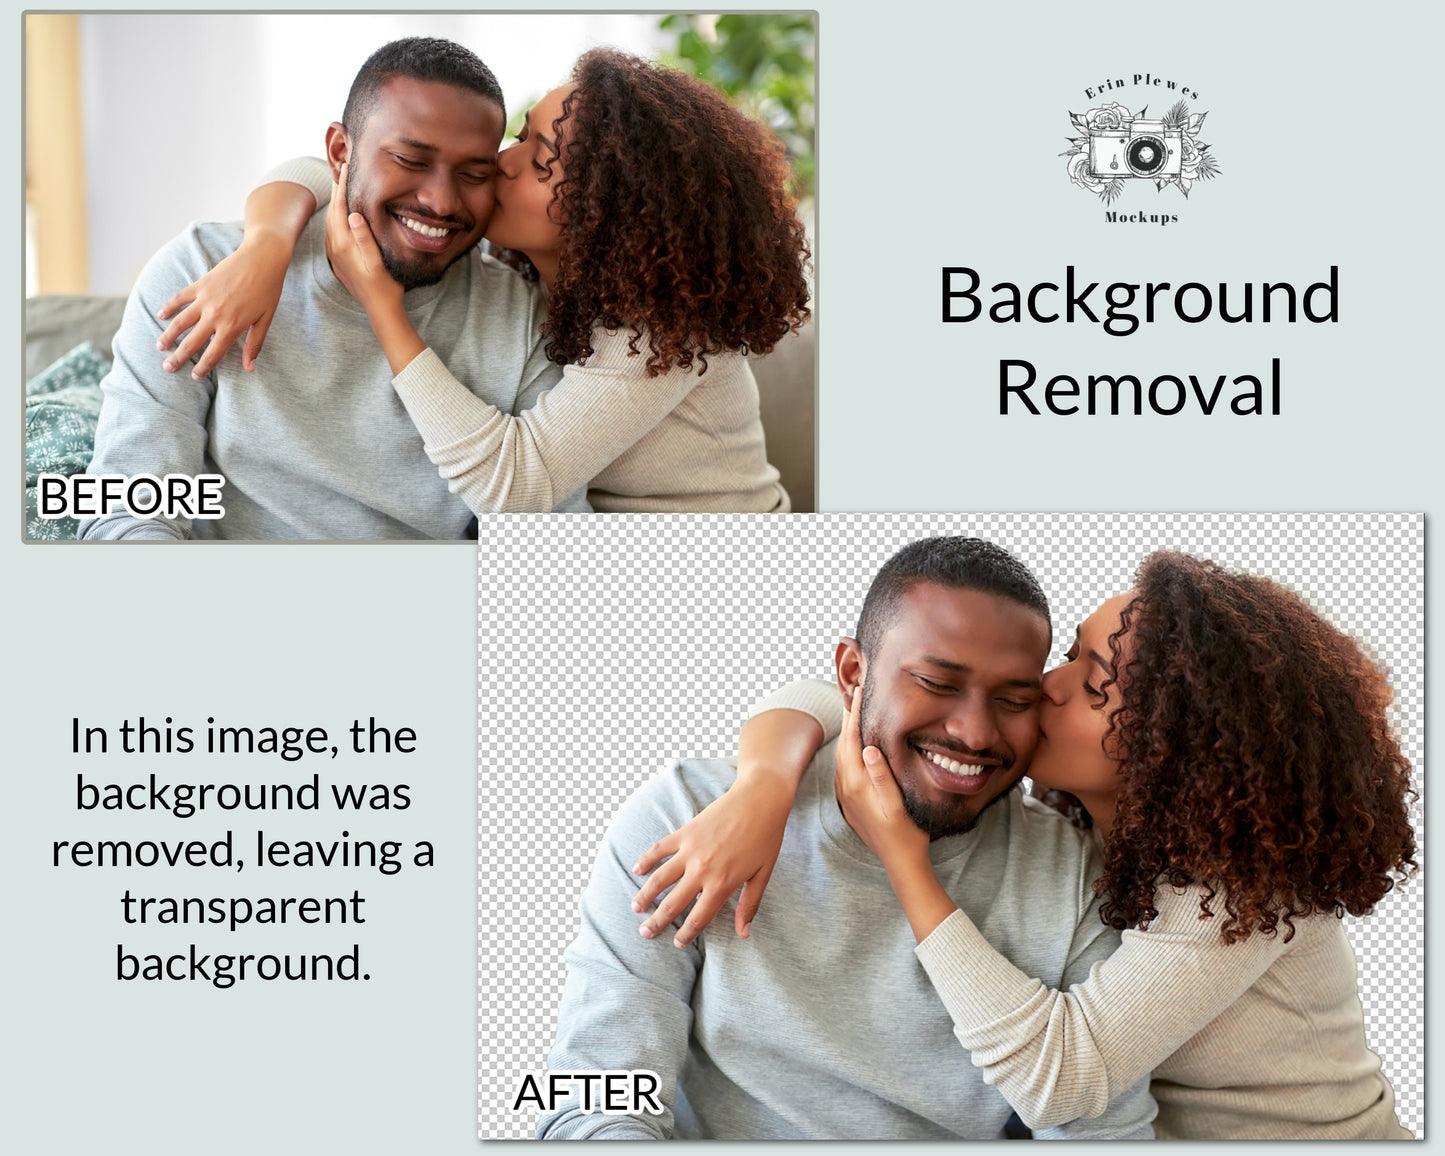 Photoshop Services, Add loved one to your photo, Object Removal, Person Removal, Photo Merge, Photoshop Deceased, Level 7